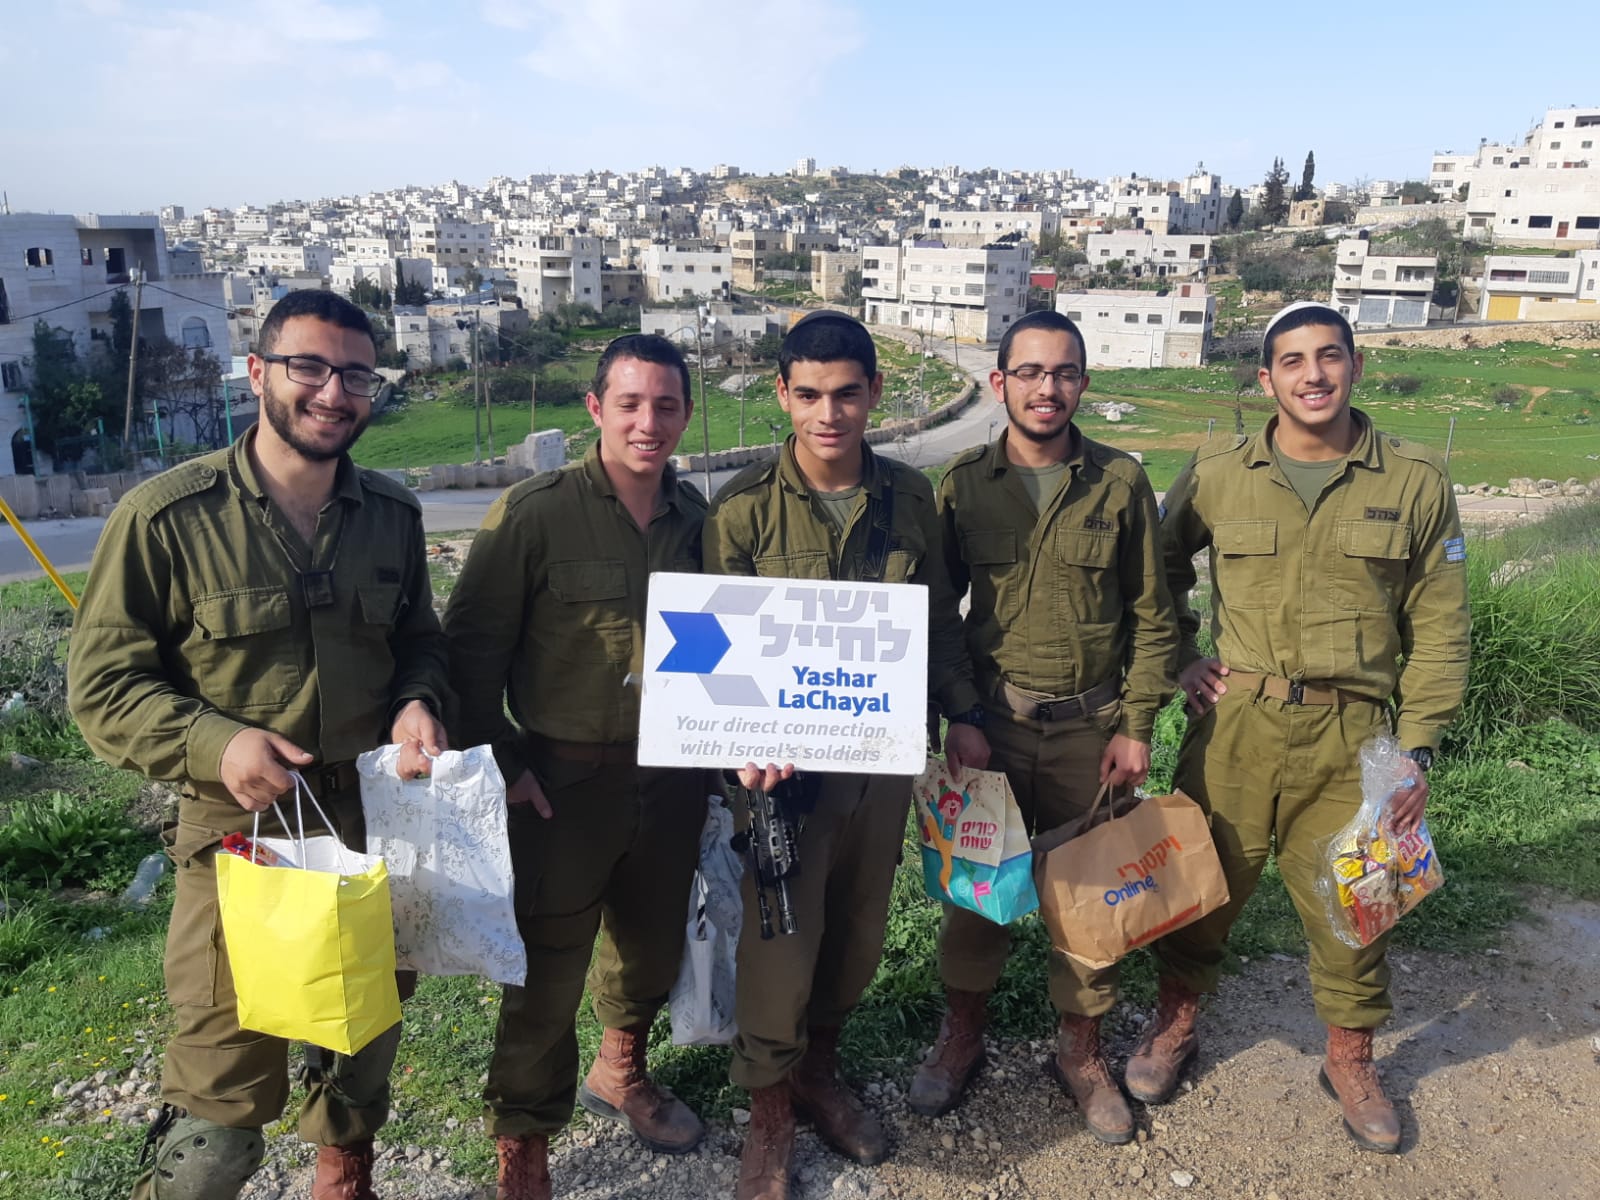 We Gave Out Thousands of Mishloach Manot (Purim snack packs) to Soldiers for Purim!